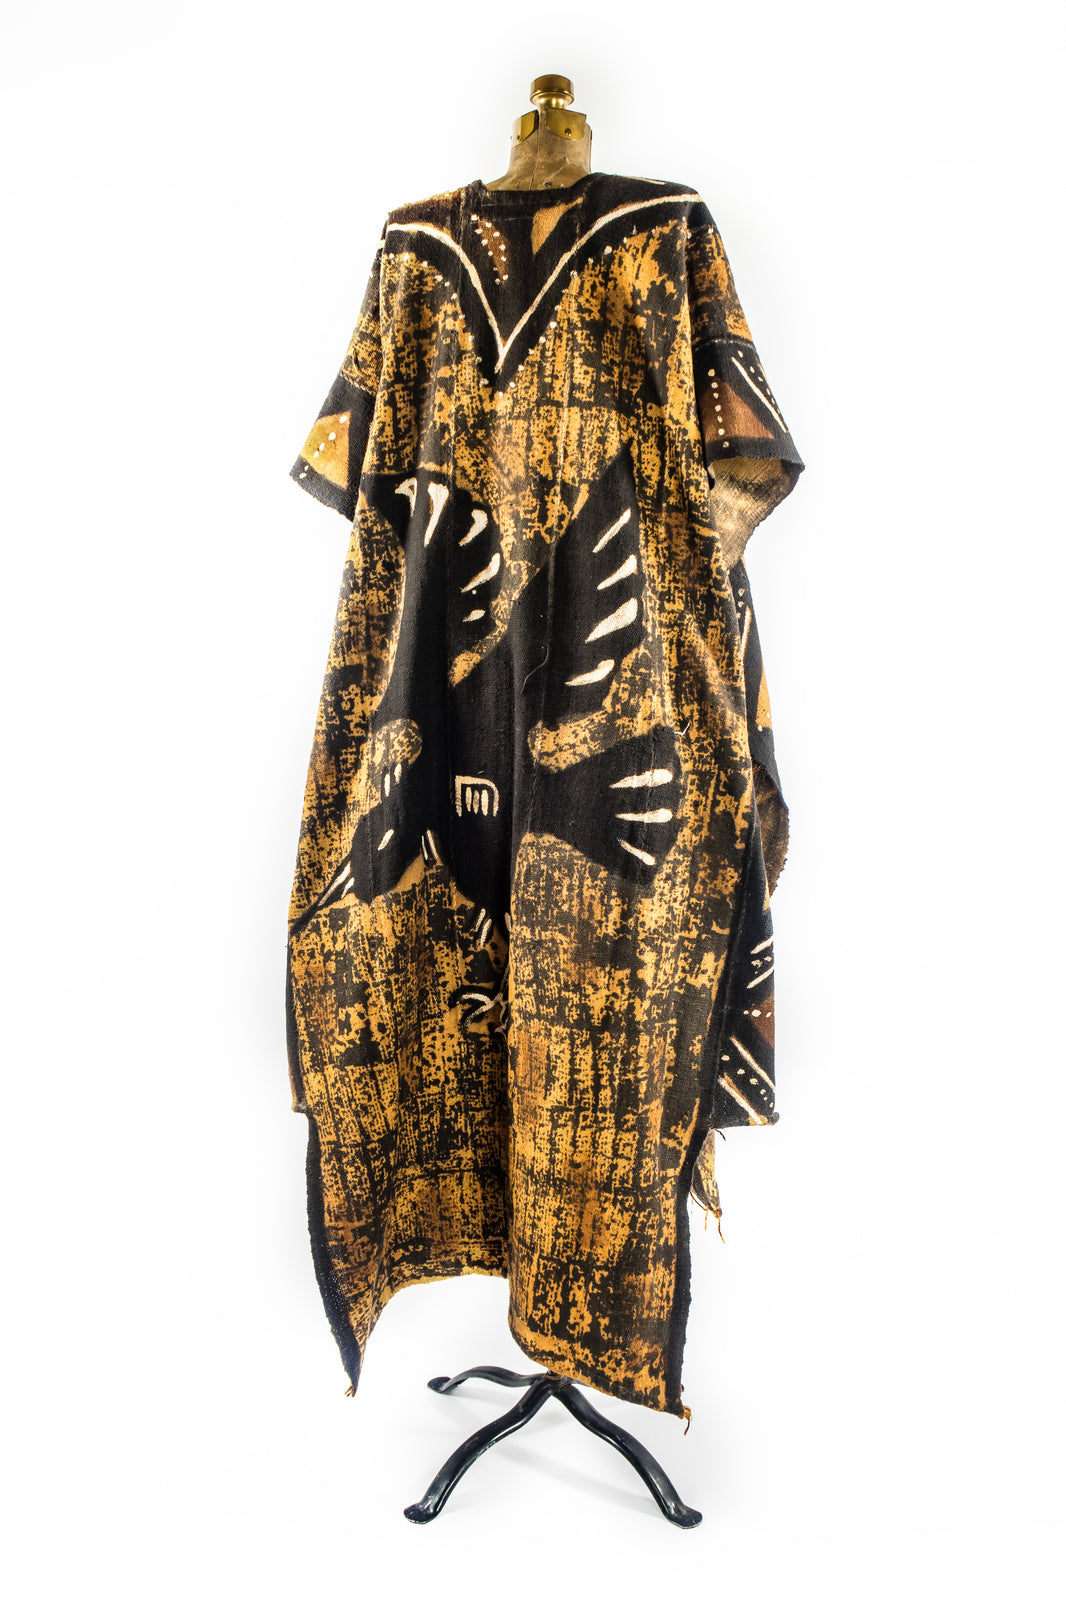 handcrafted mudcloth Clothing - African Art - Woven Cotton - African Plural Art - African Cotton  Bogolan Textile,  Mudcloth Poncho, Handcrafted, West African